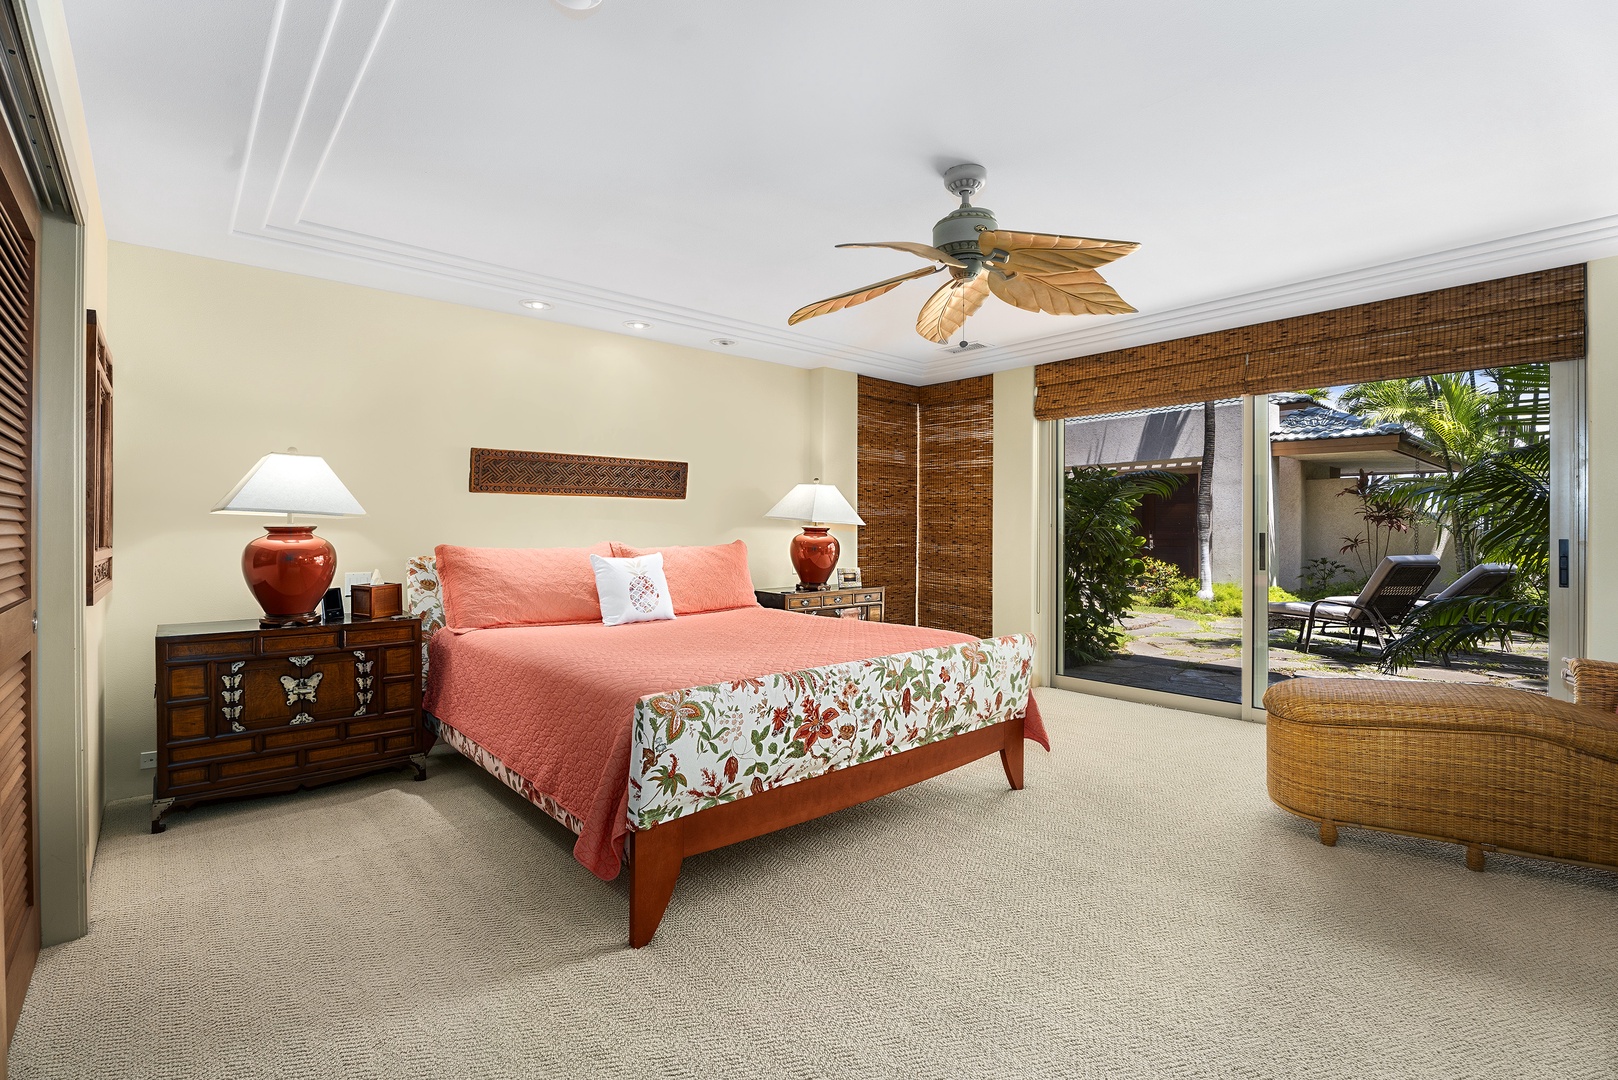 Kamuela Vacation Rentals, Champion Ridge #35 - Downstairs bedroom equipped with King bed